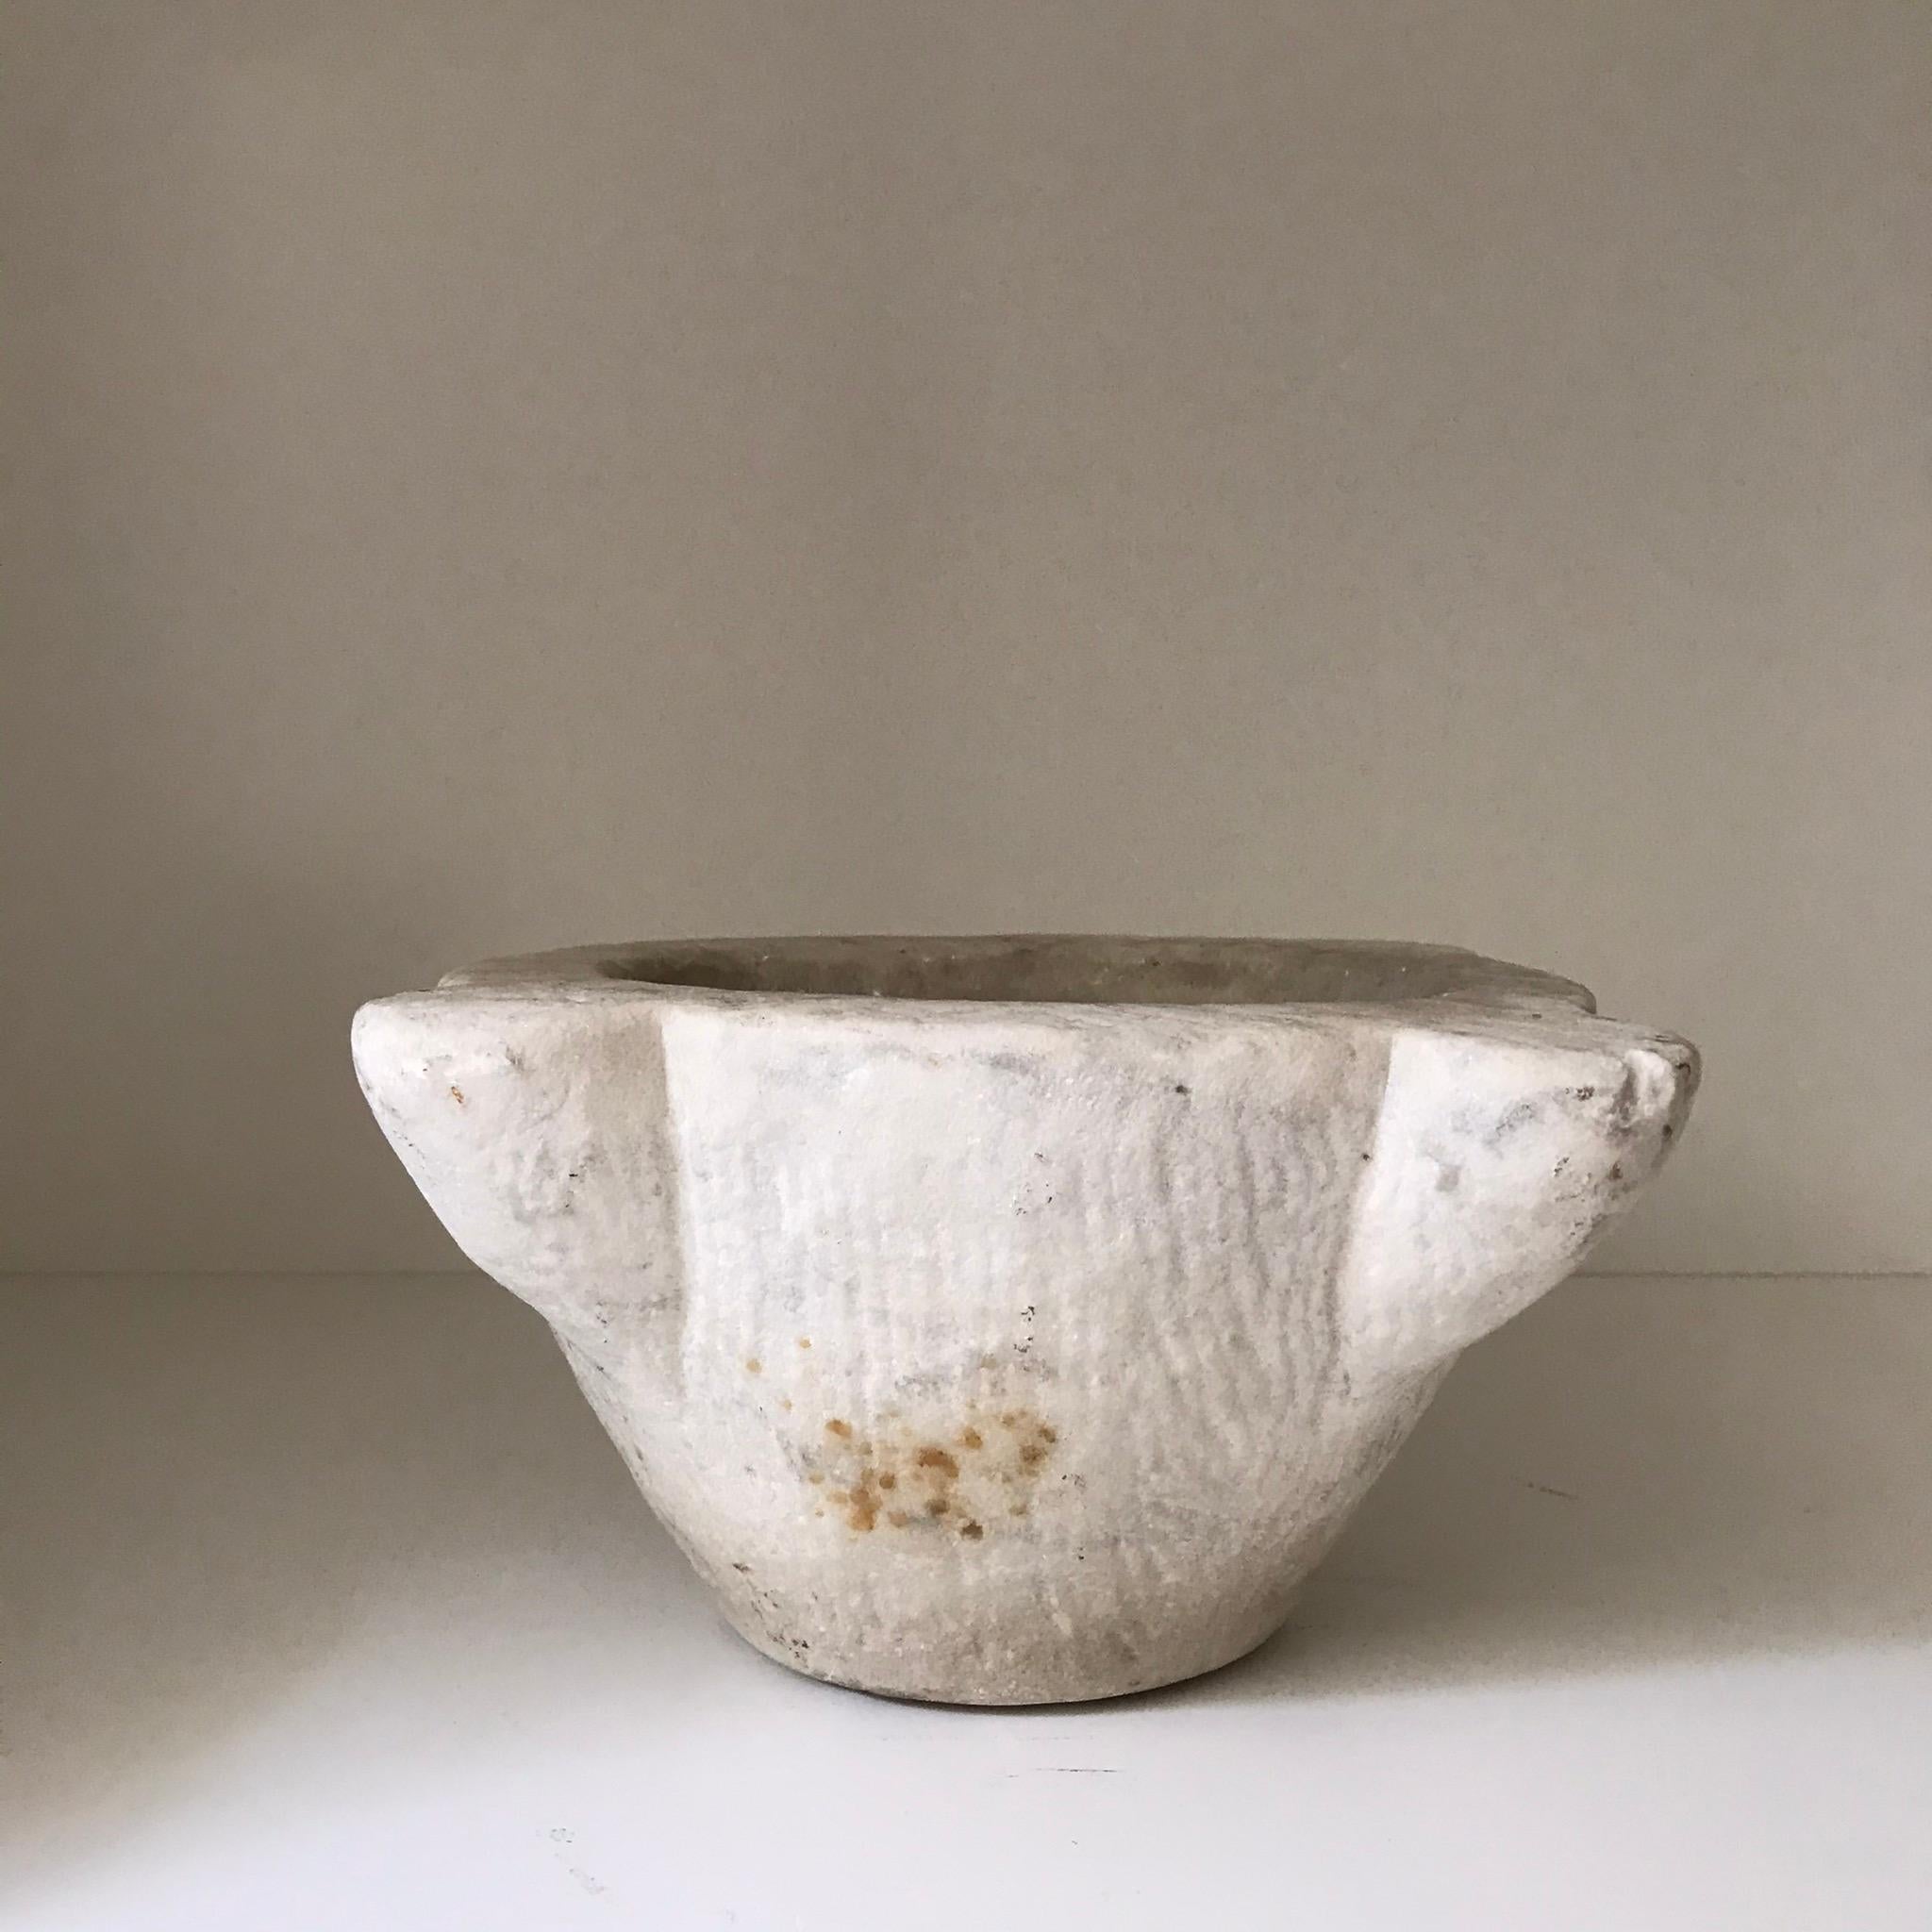 This 19th century marble mortar has a uniquely rough, hand hewn finish from its hand carved construction and age. Originating in France, the mortar has gained a unique patina over the course of the past 150 years as a functional object. 